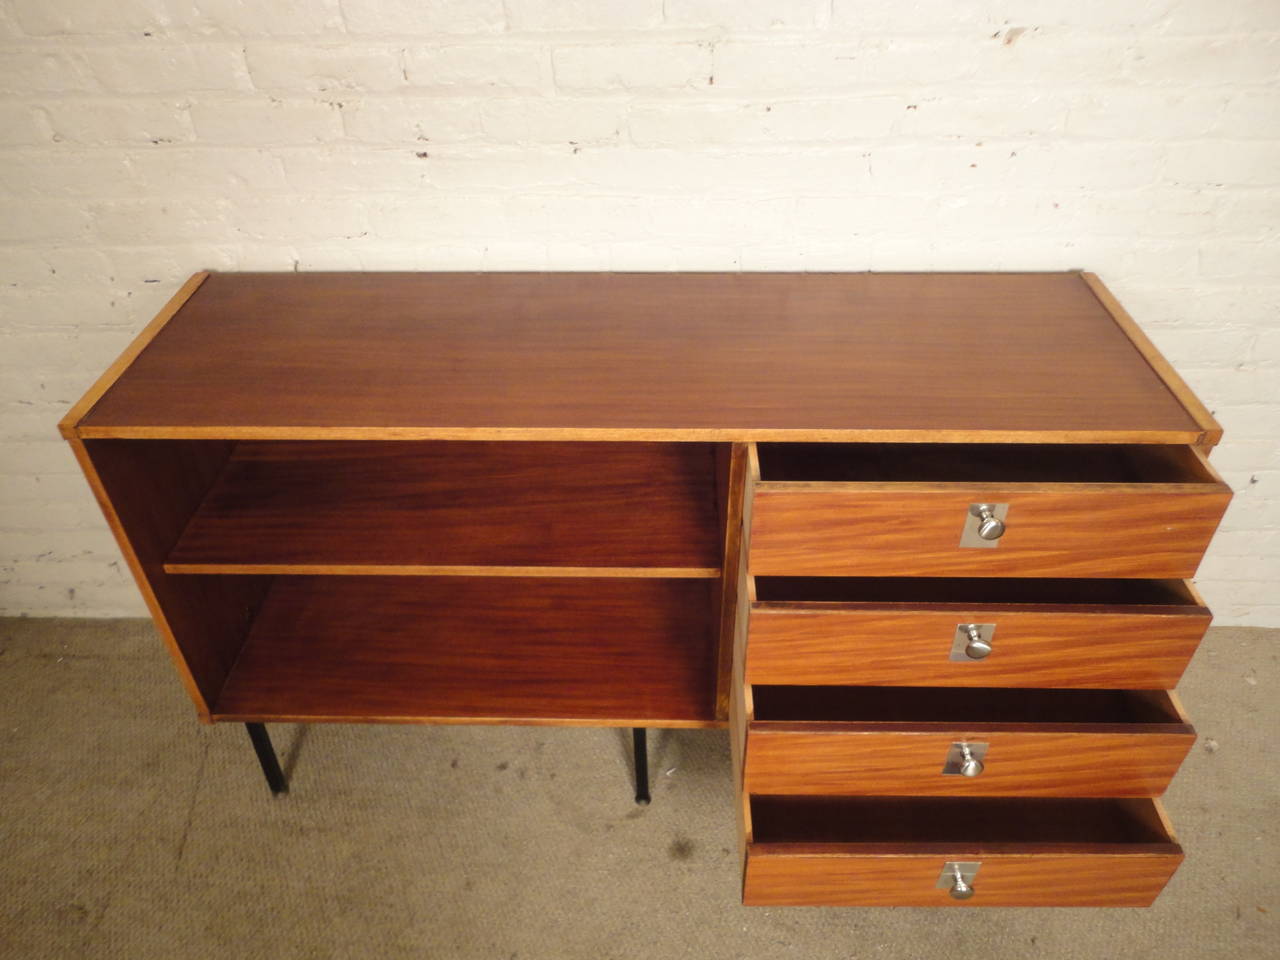 Unique Mid-Century Modern Credenza In The Style Of George Nelson 1